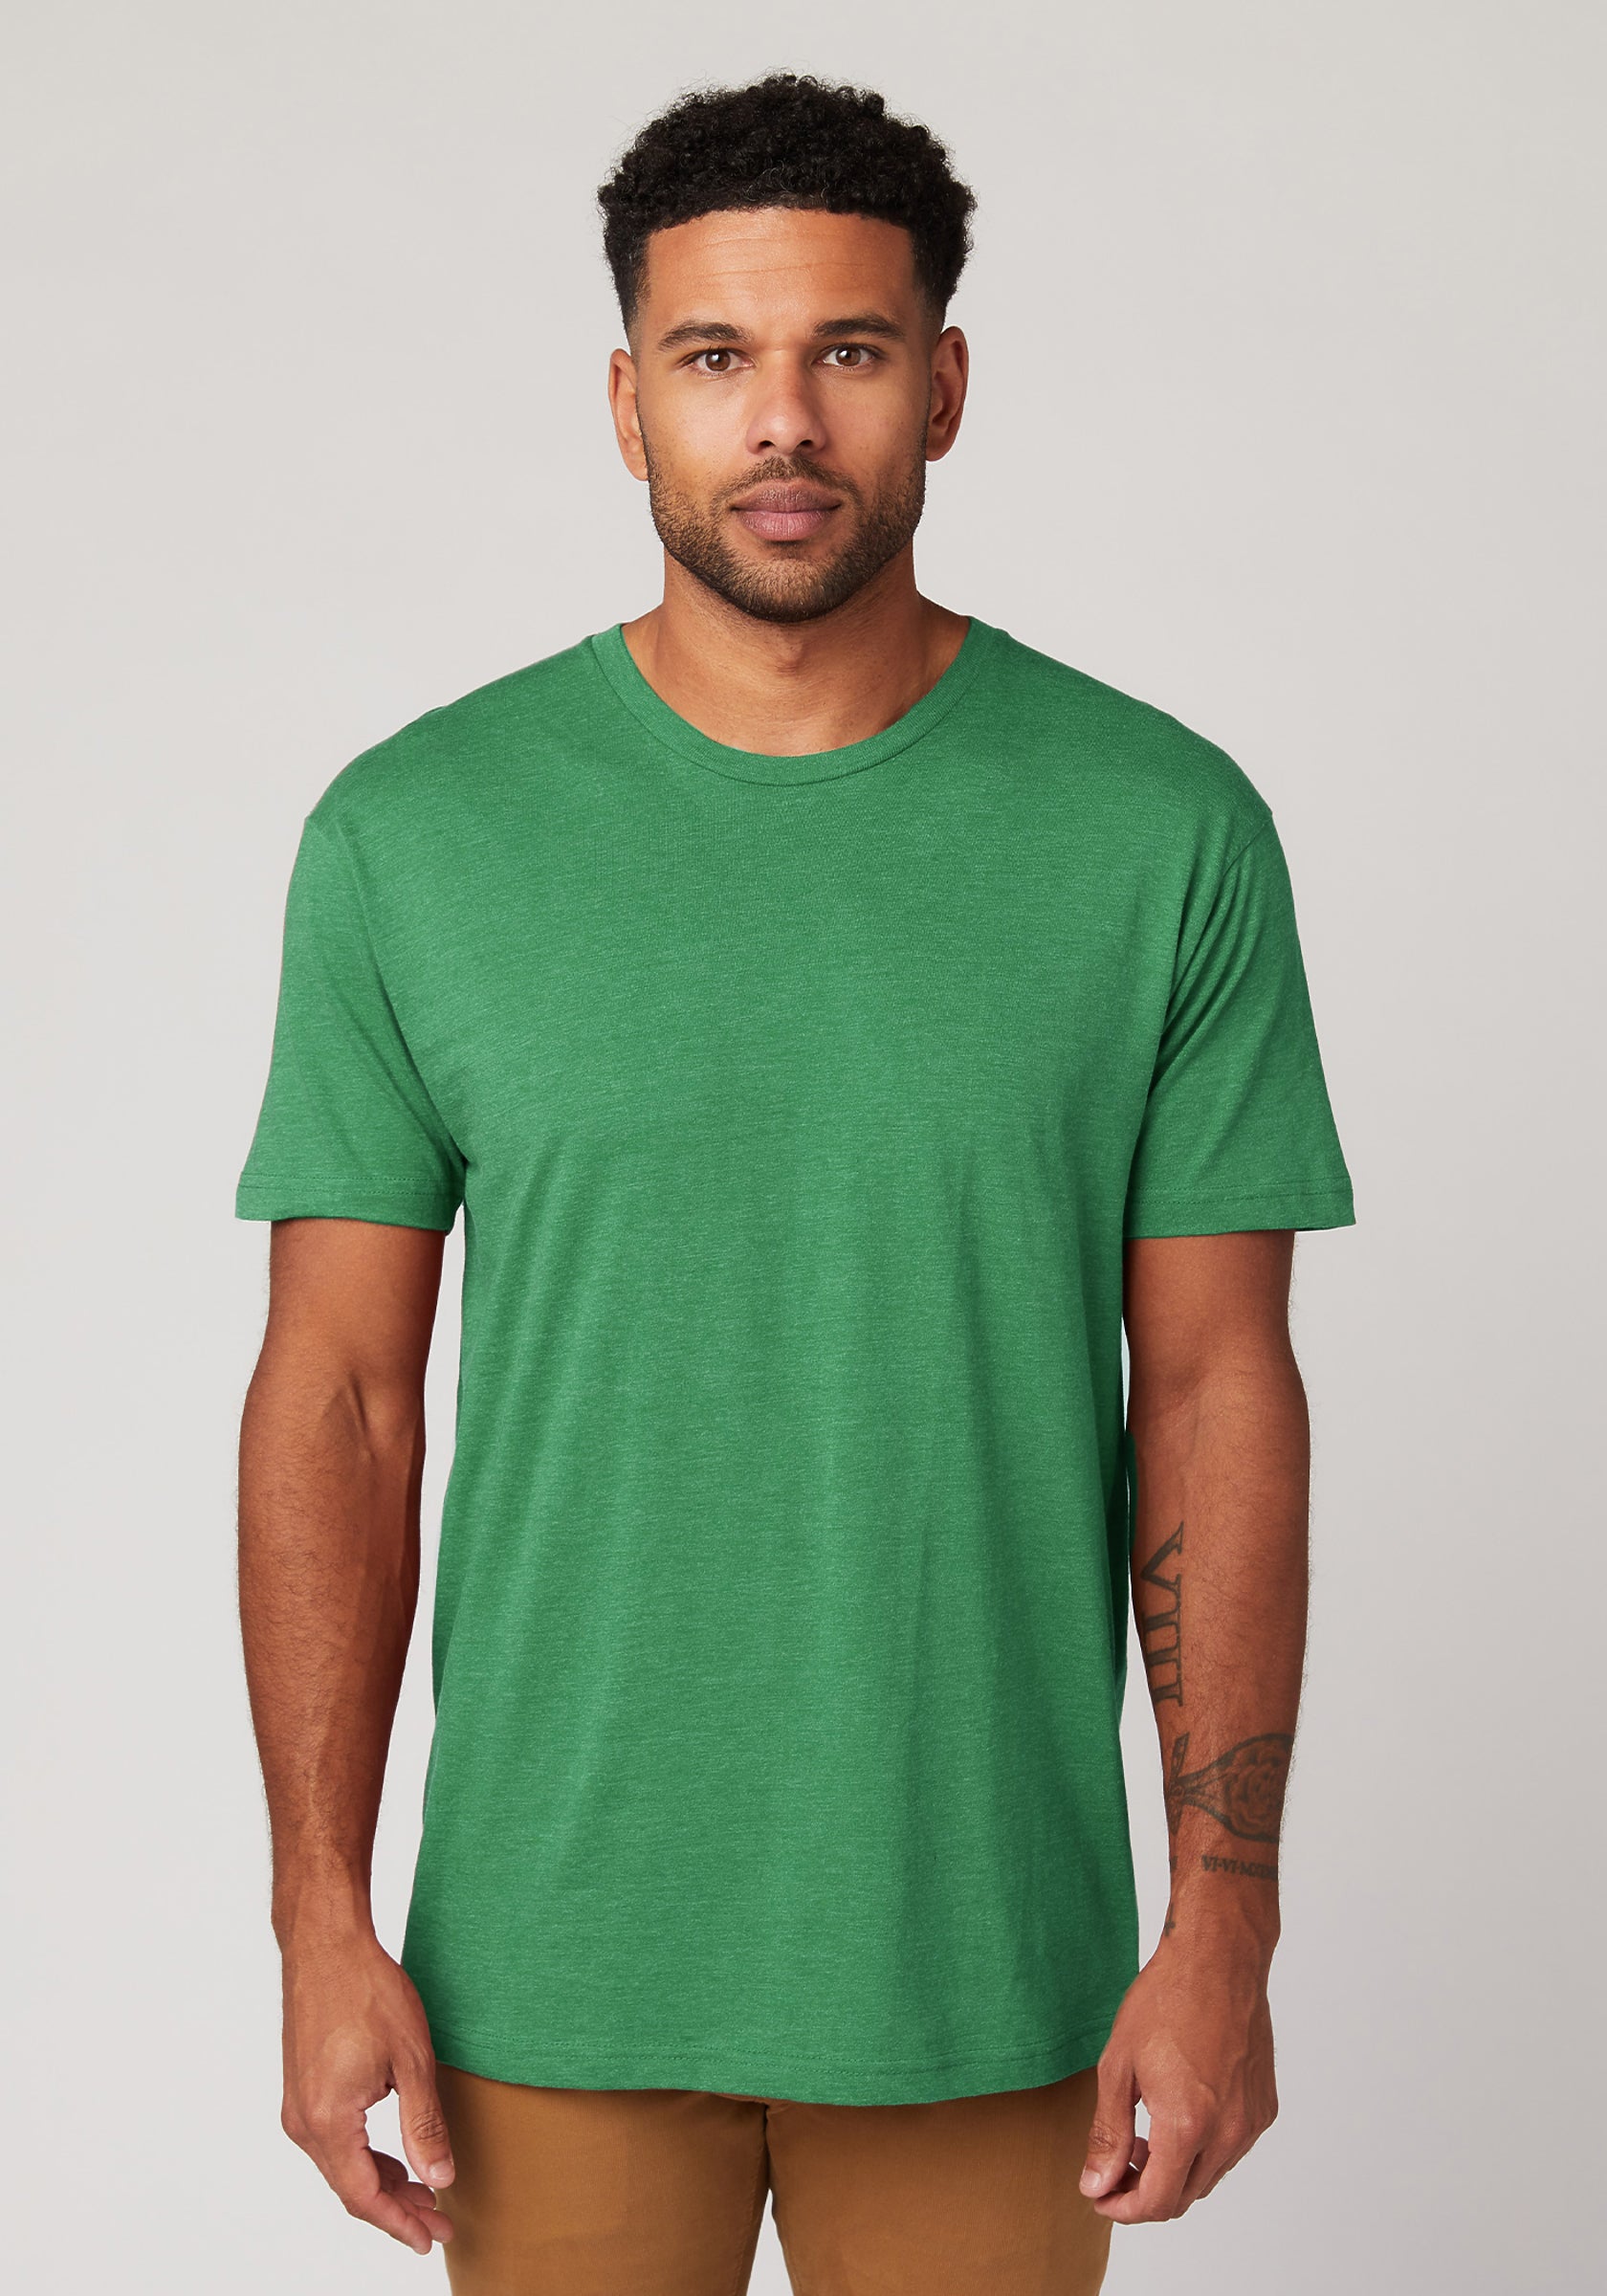 CH BLANK TEE- HEATHER KELLY GREEN - Lucky and Blessed Life LLC / L&B Life